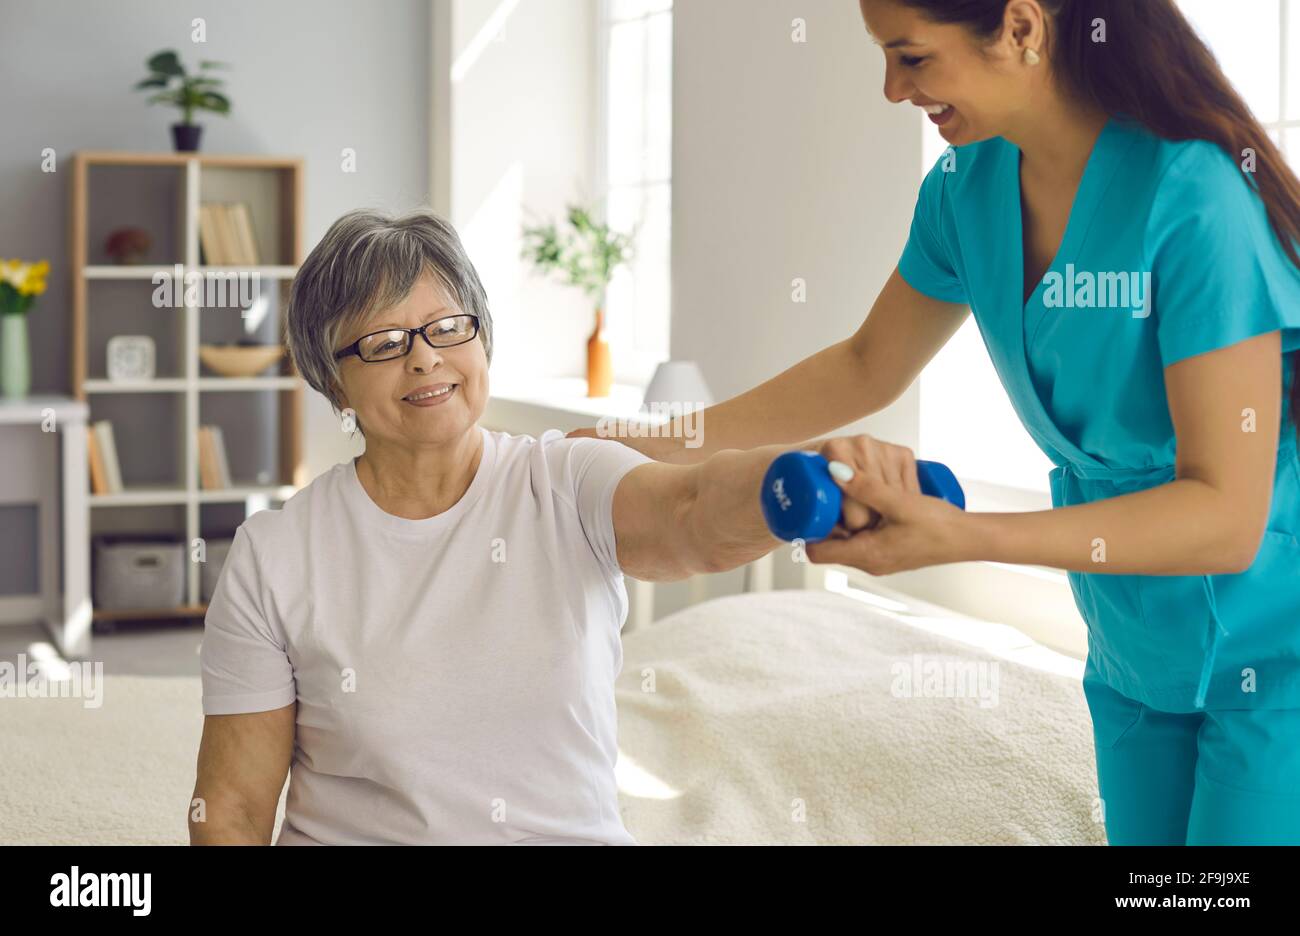 Elderly woman patient rehabilitation with professional nurse help at home Stock Photo